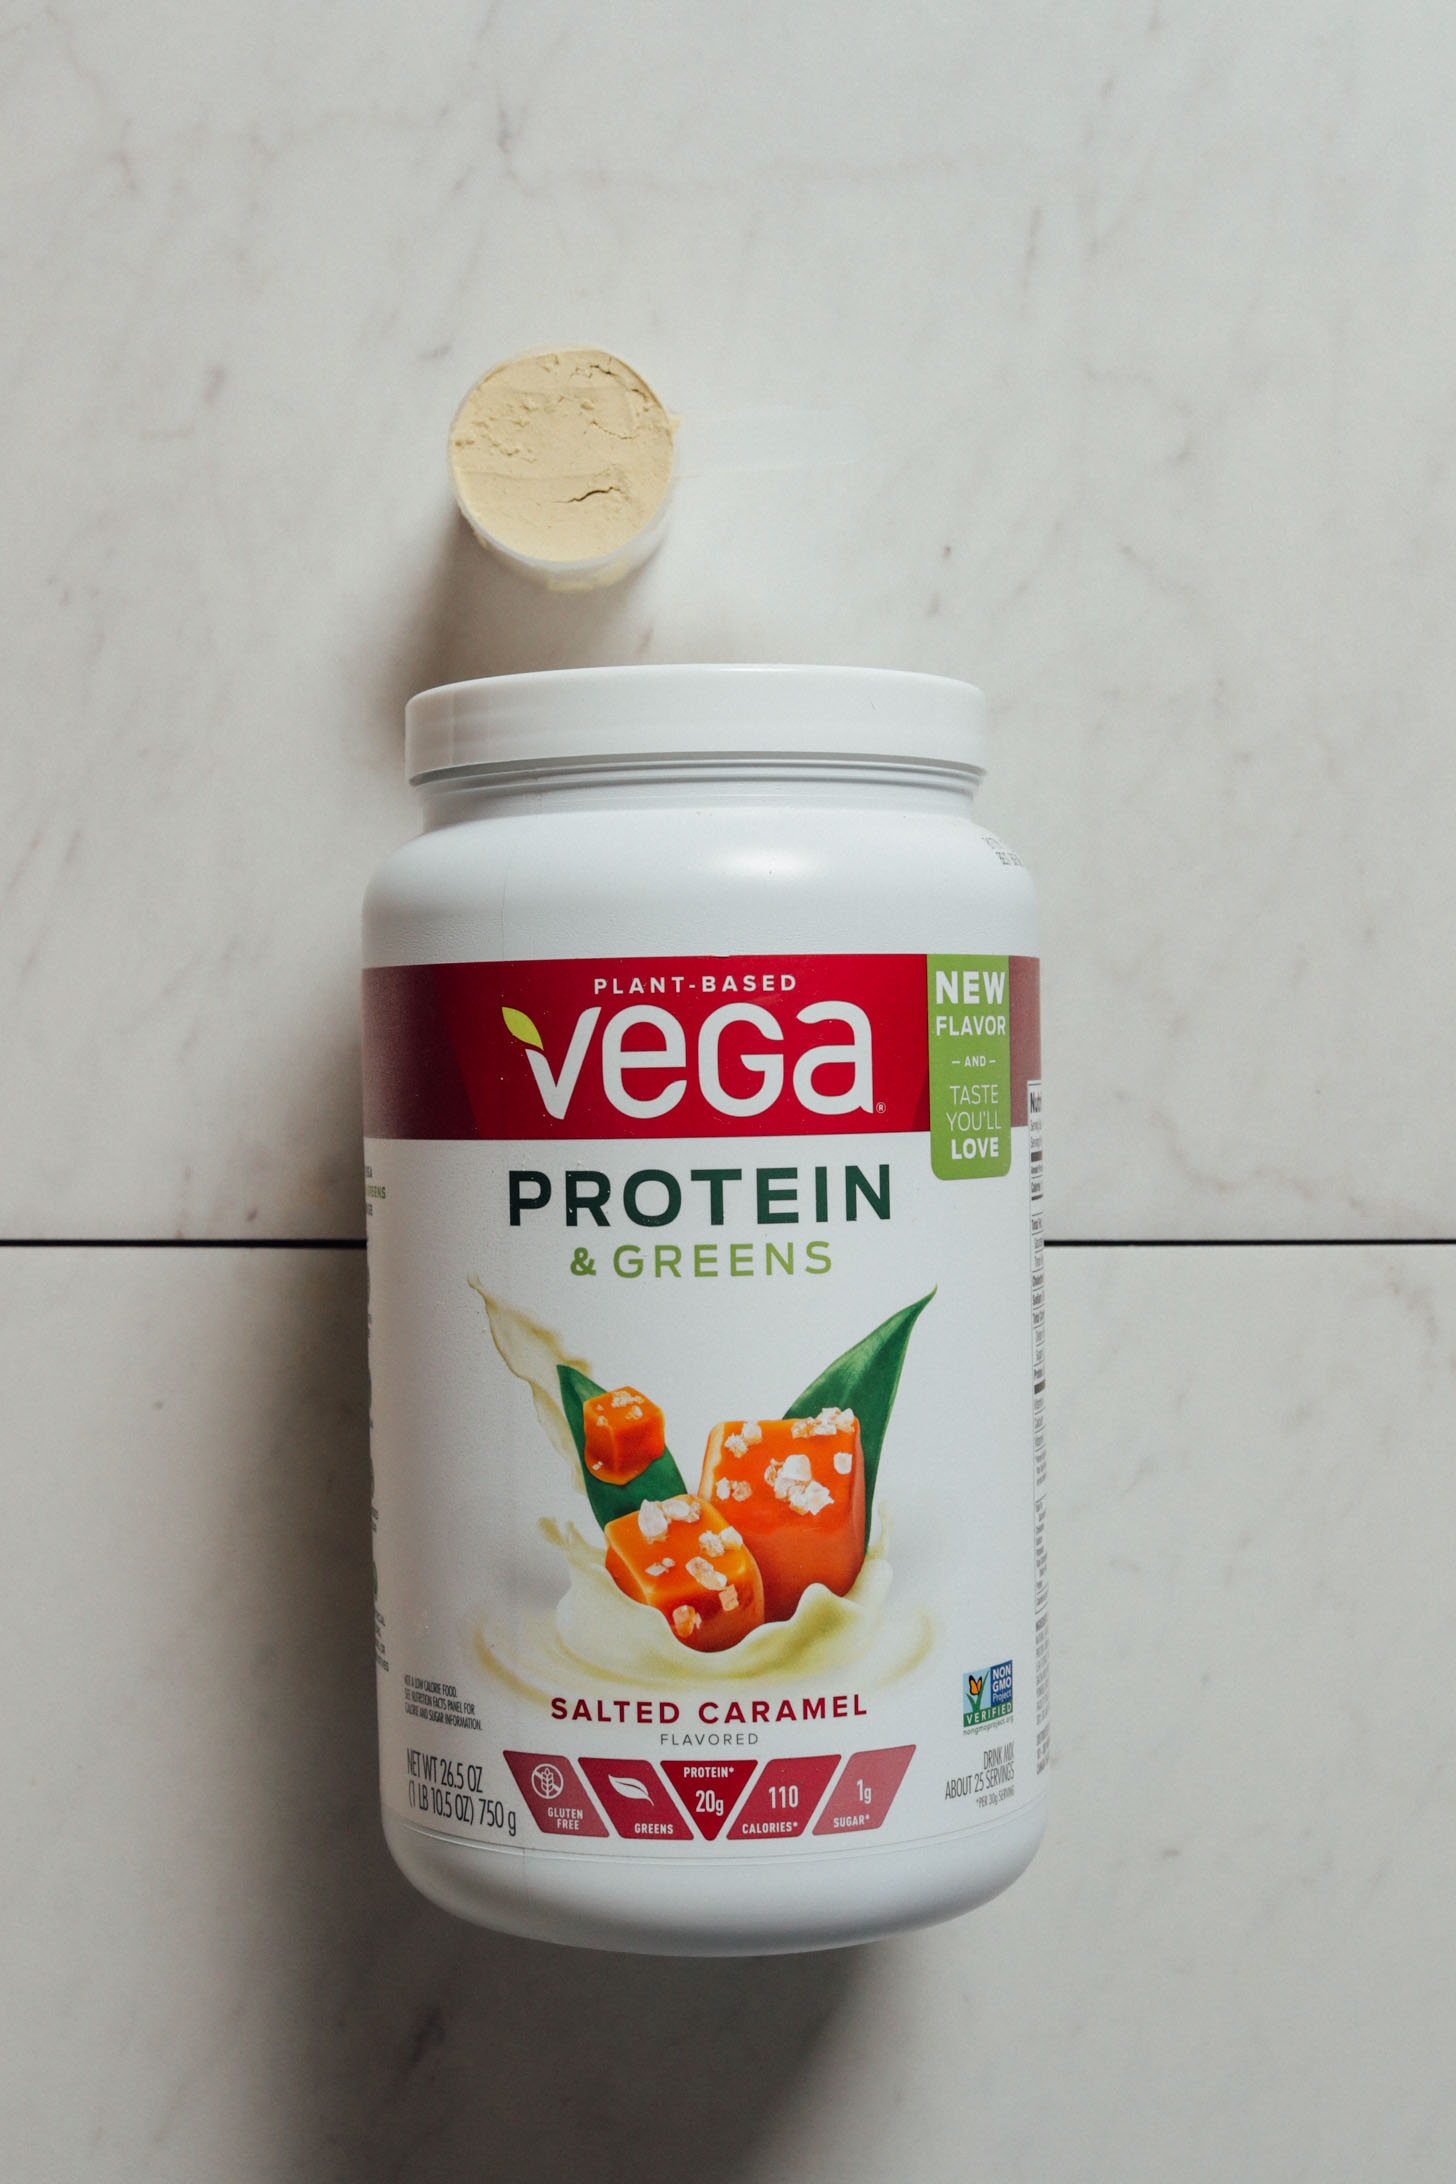 Tub and scoop of the delicious Vega Salted Caramel protein powder for our review